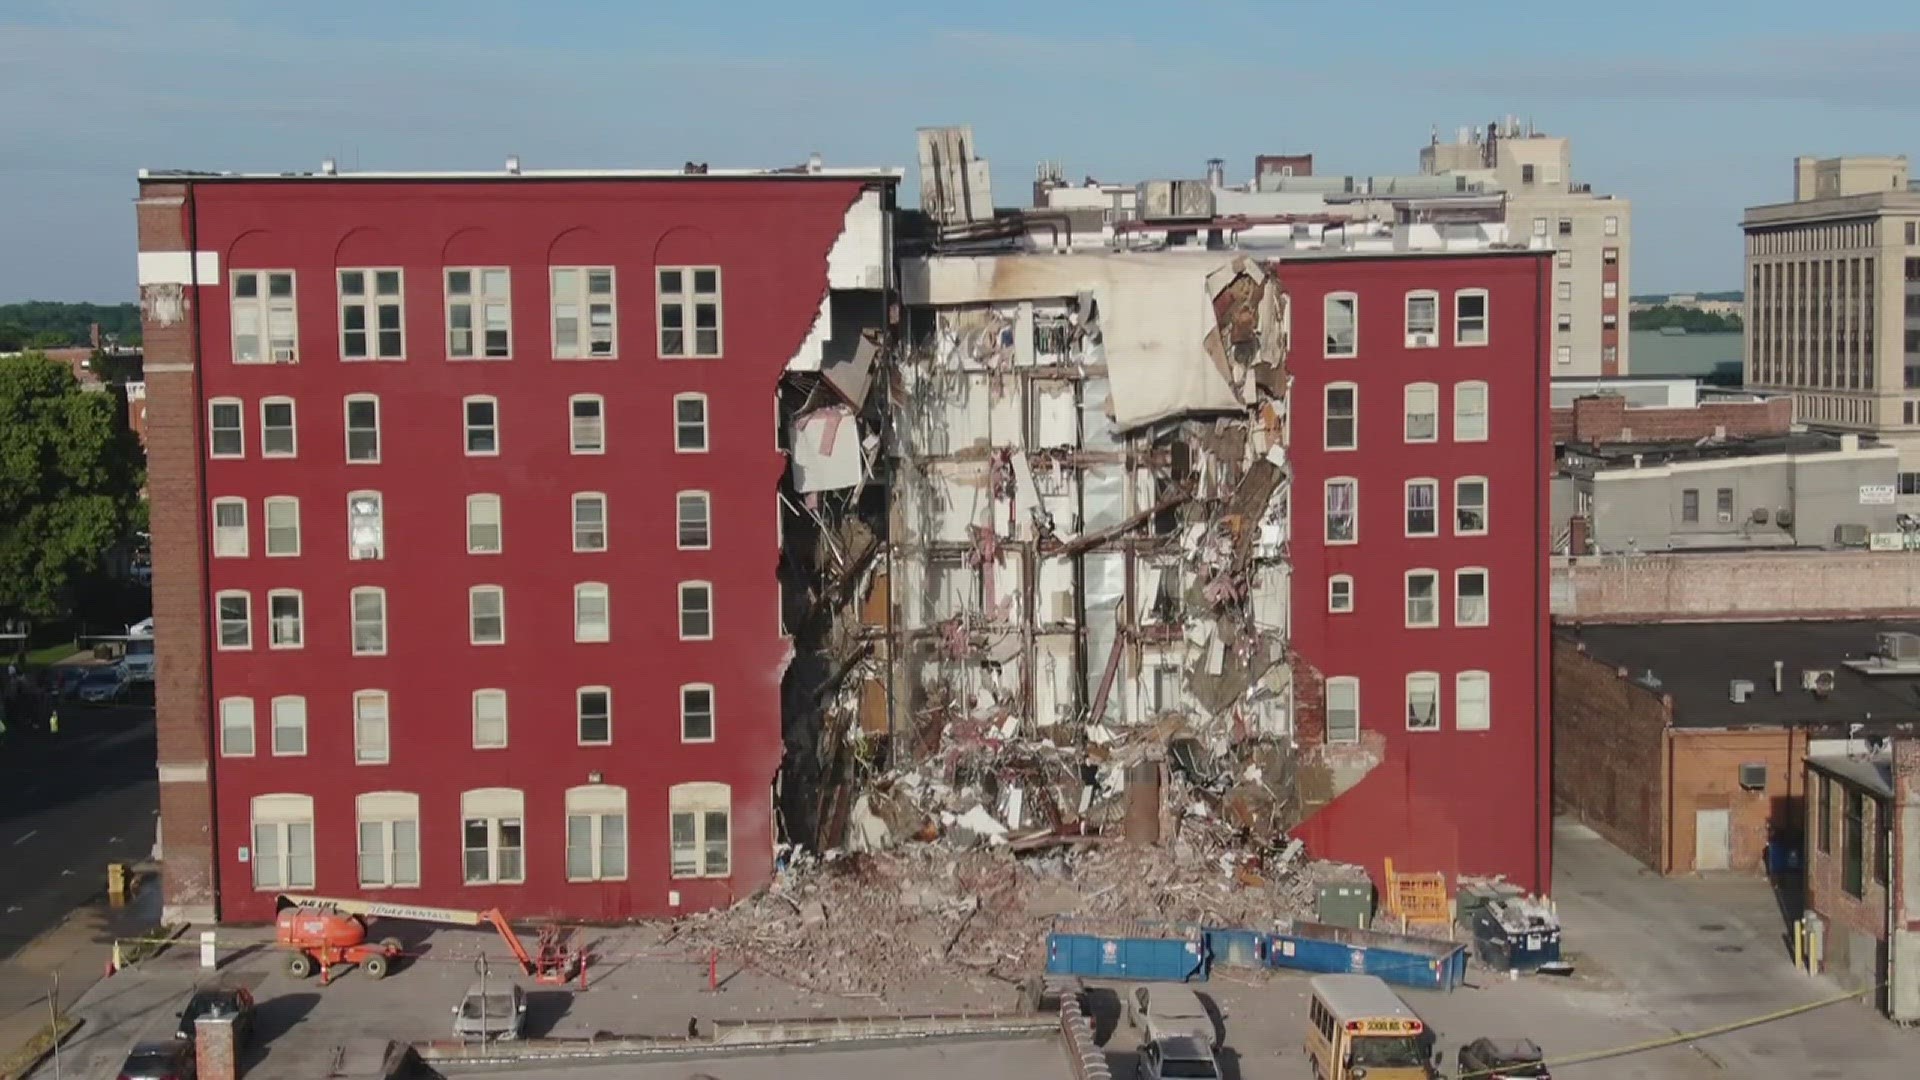 News 8 looks back on the devastating collapse which killed three people, more than six months later.